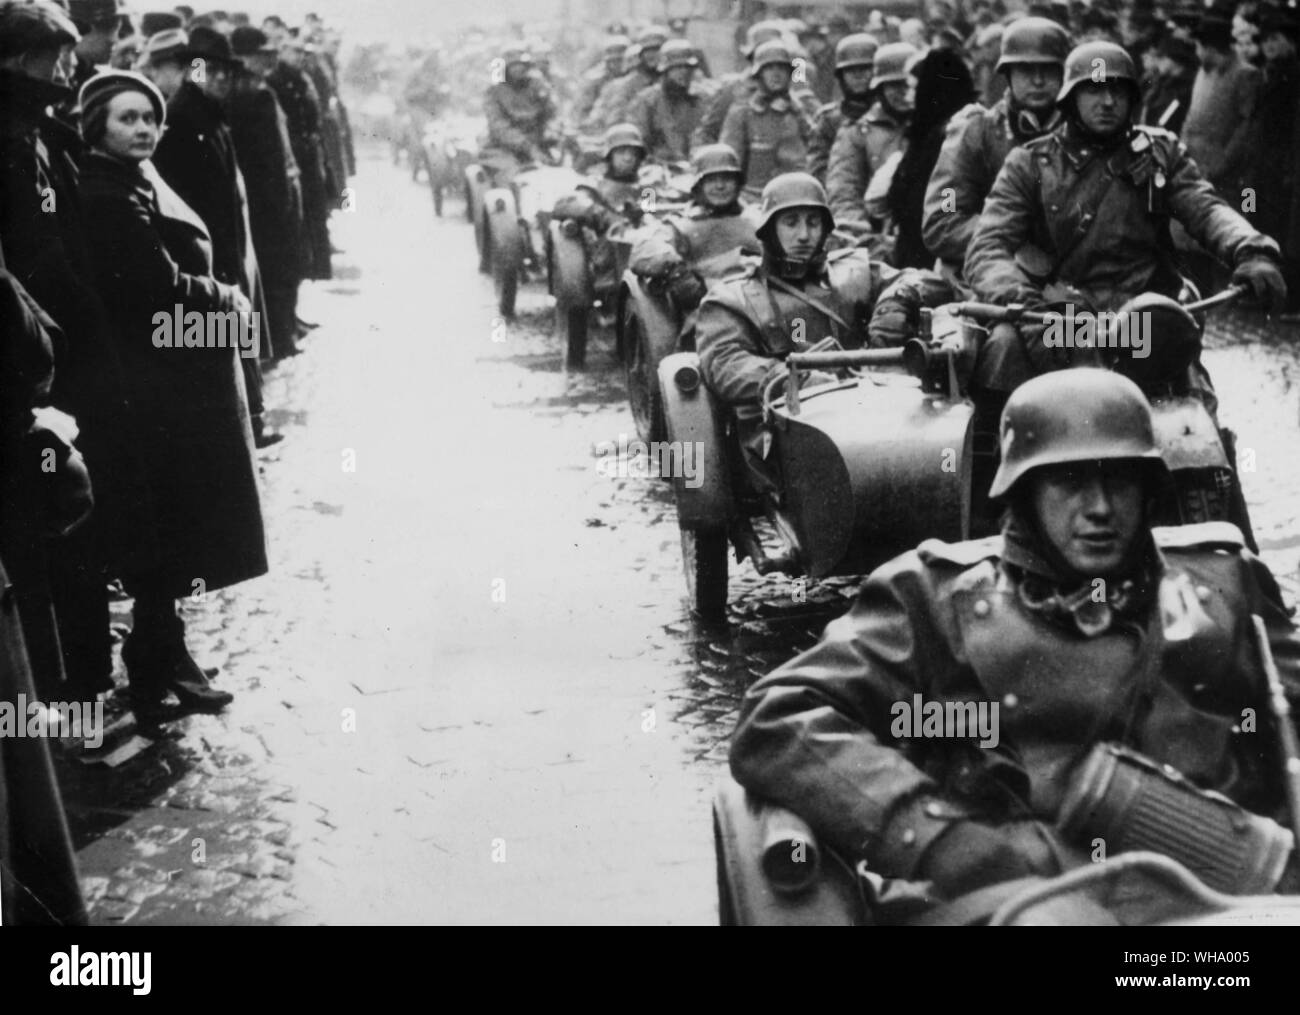 Czechoslovakia: Sullen crowds watch as German troops enter Prague in March 1939. German motorised infantry enter Prague on March 15th 1939, through the streets lined with people. Stock Photo